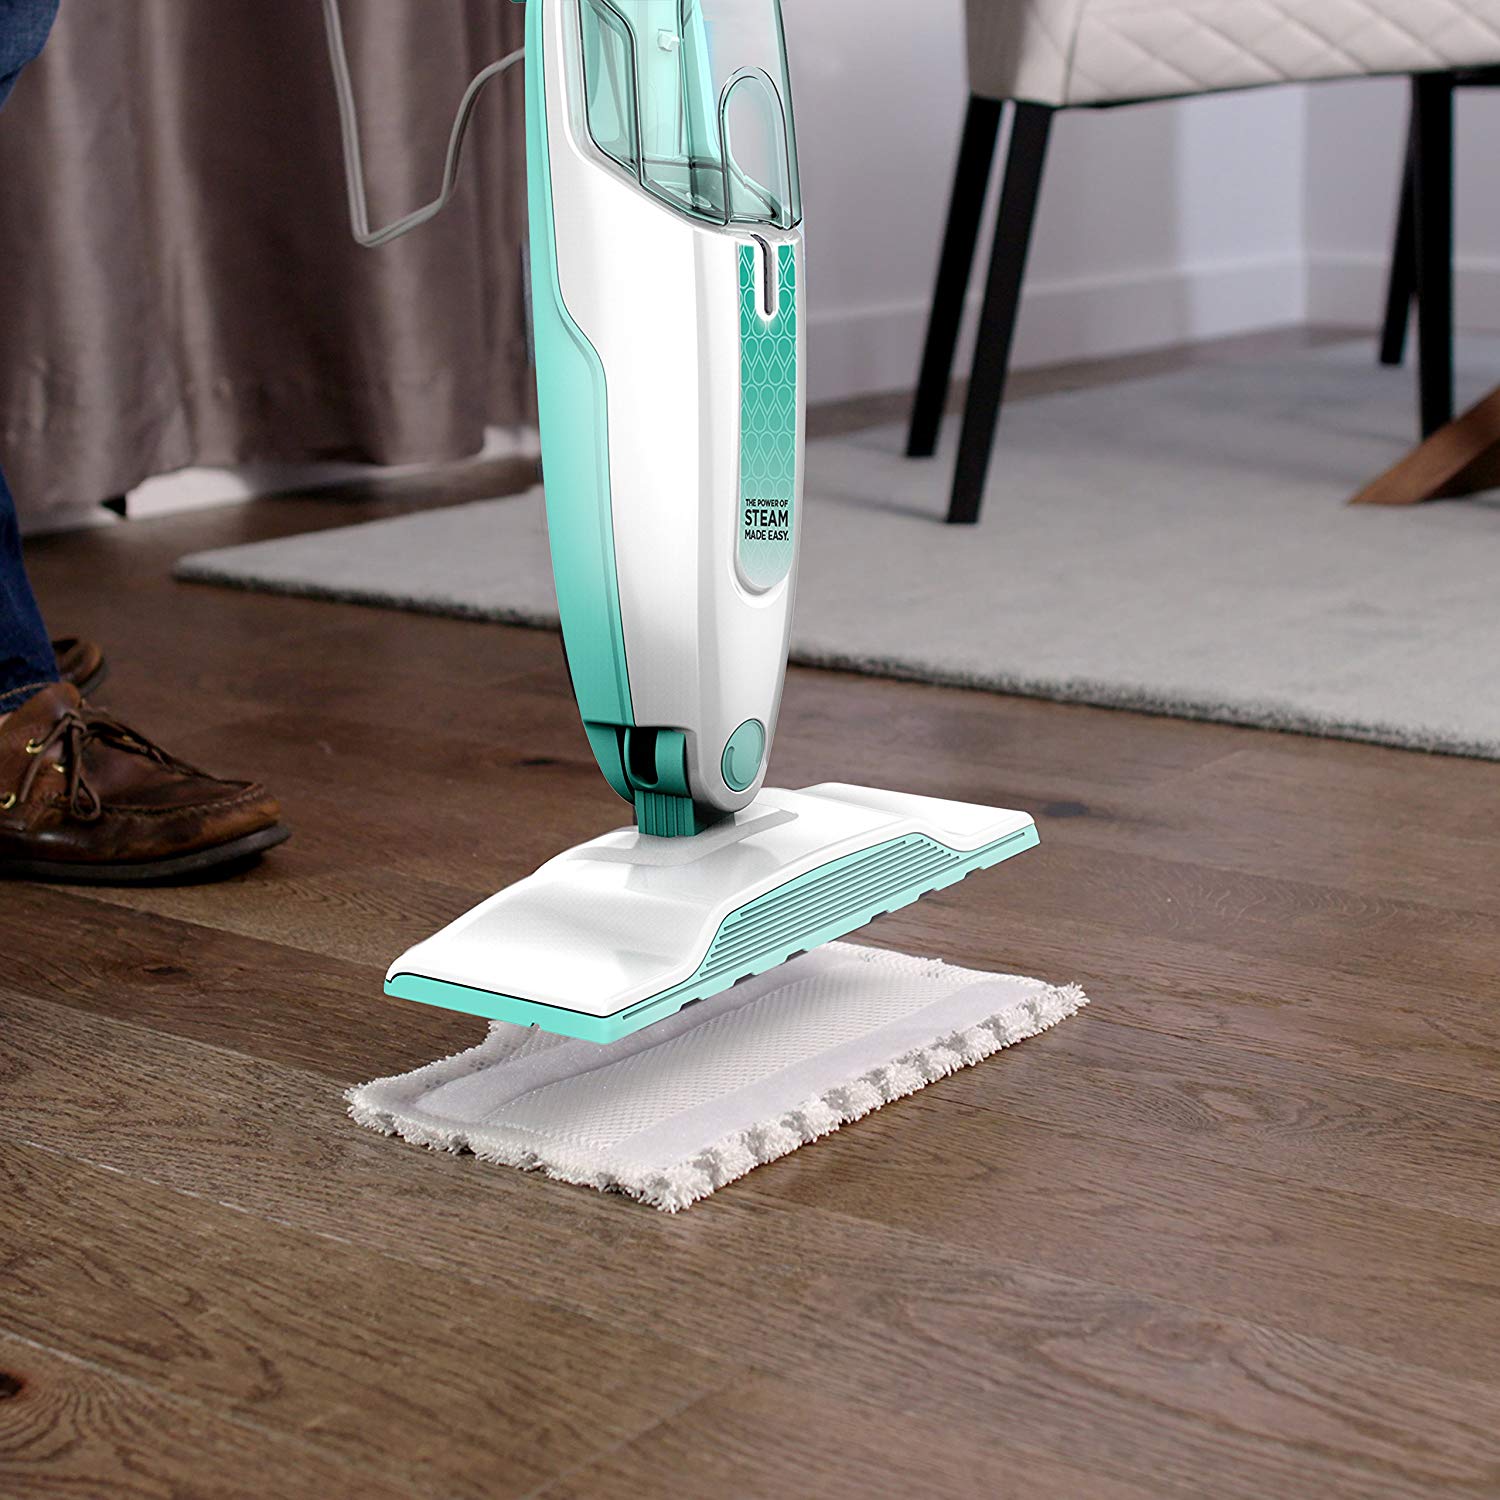 Best Steam Cleaner For Floors And Walls - Best Steam Cleaner For Upholstery